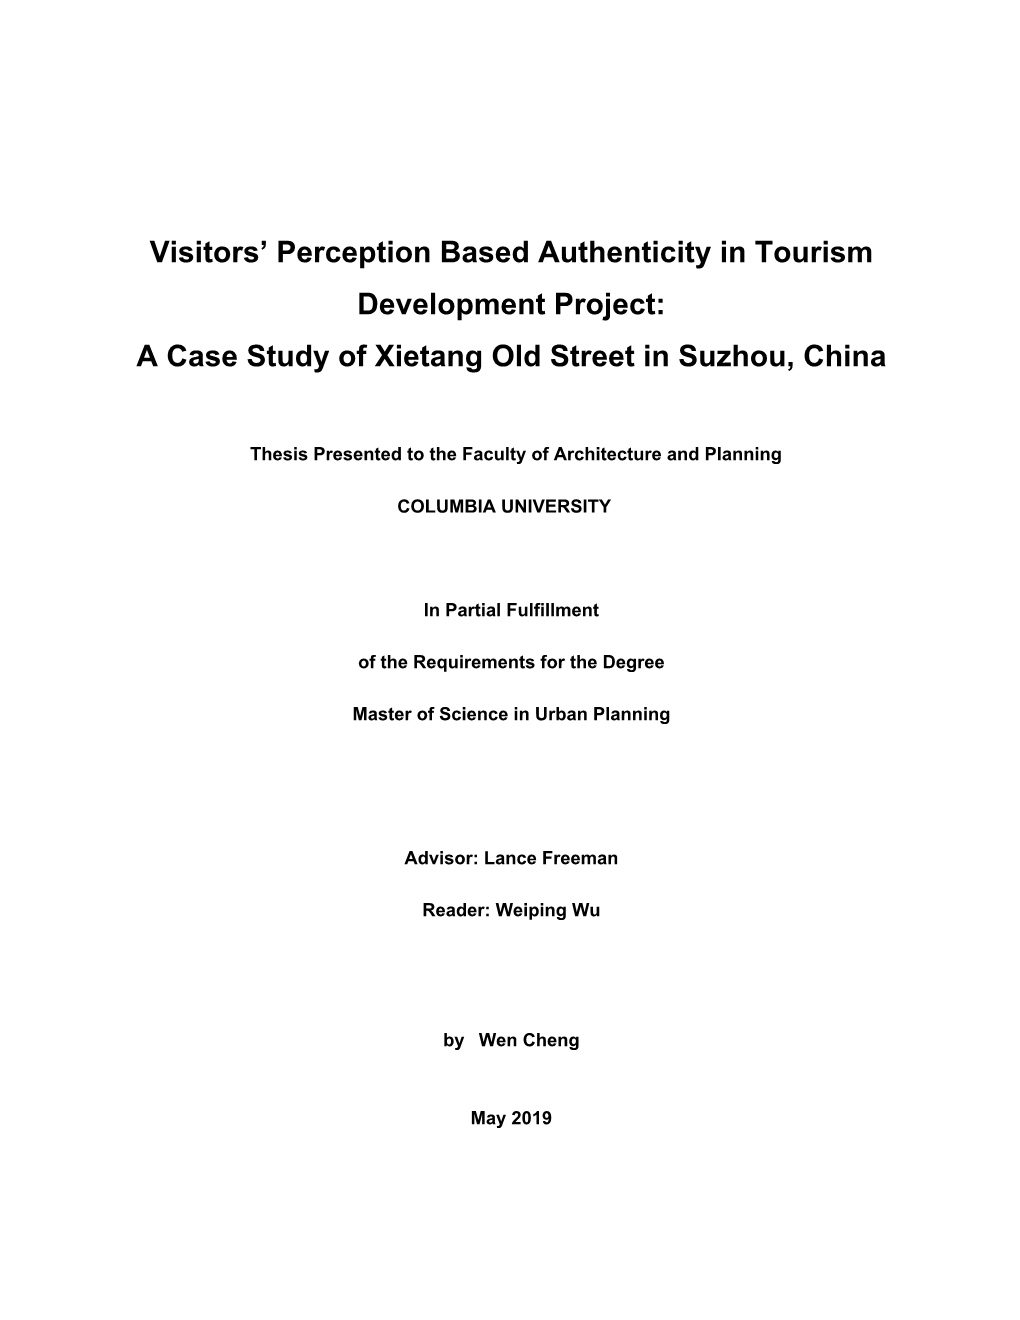 Visitors' Perception Based Authenticity in Tourism